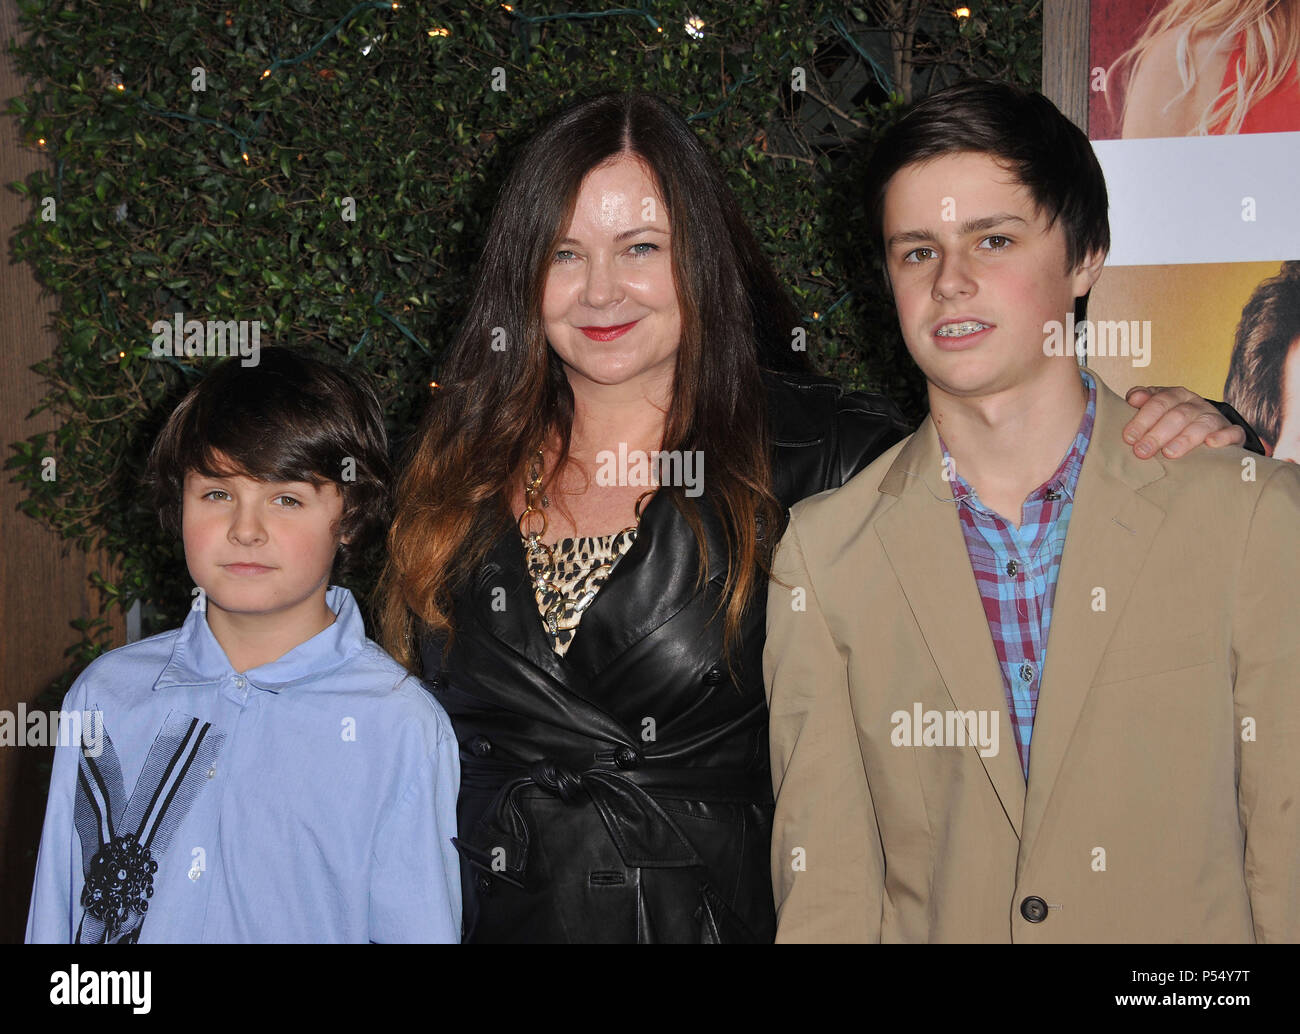 Jennifer Nicholson and sons Sean Norfleet, Duke Norfleet - How do You Know Premiere at the Westwood Village Theatre In Los Angeles.Jennifer Nicholson and sons Sean Norfleet, Duke Norfleet 17  Event in Hollywood Life - California, Red Carpet Event, USA, Film Industry, Celebrities, Photography, Bestof, Arts Culture and Entertainment, Celebrities fashion, Best of, Hollywood Life, Event in Hollywood Life - California, Red Carpet and backstage, Music celebrities, Topix, Couple, family ( husband and wife ) and kids- Children, brothers and sisters inquiry tsuni@Gamma-USA.com, Credit Tsuni / USA, 2010 Stock Photo